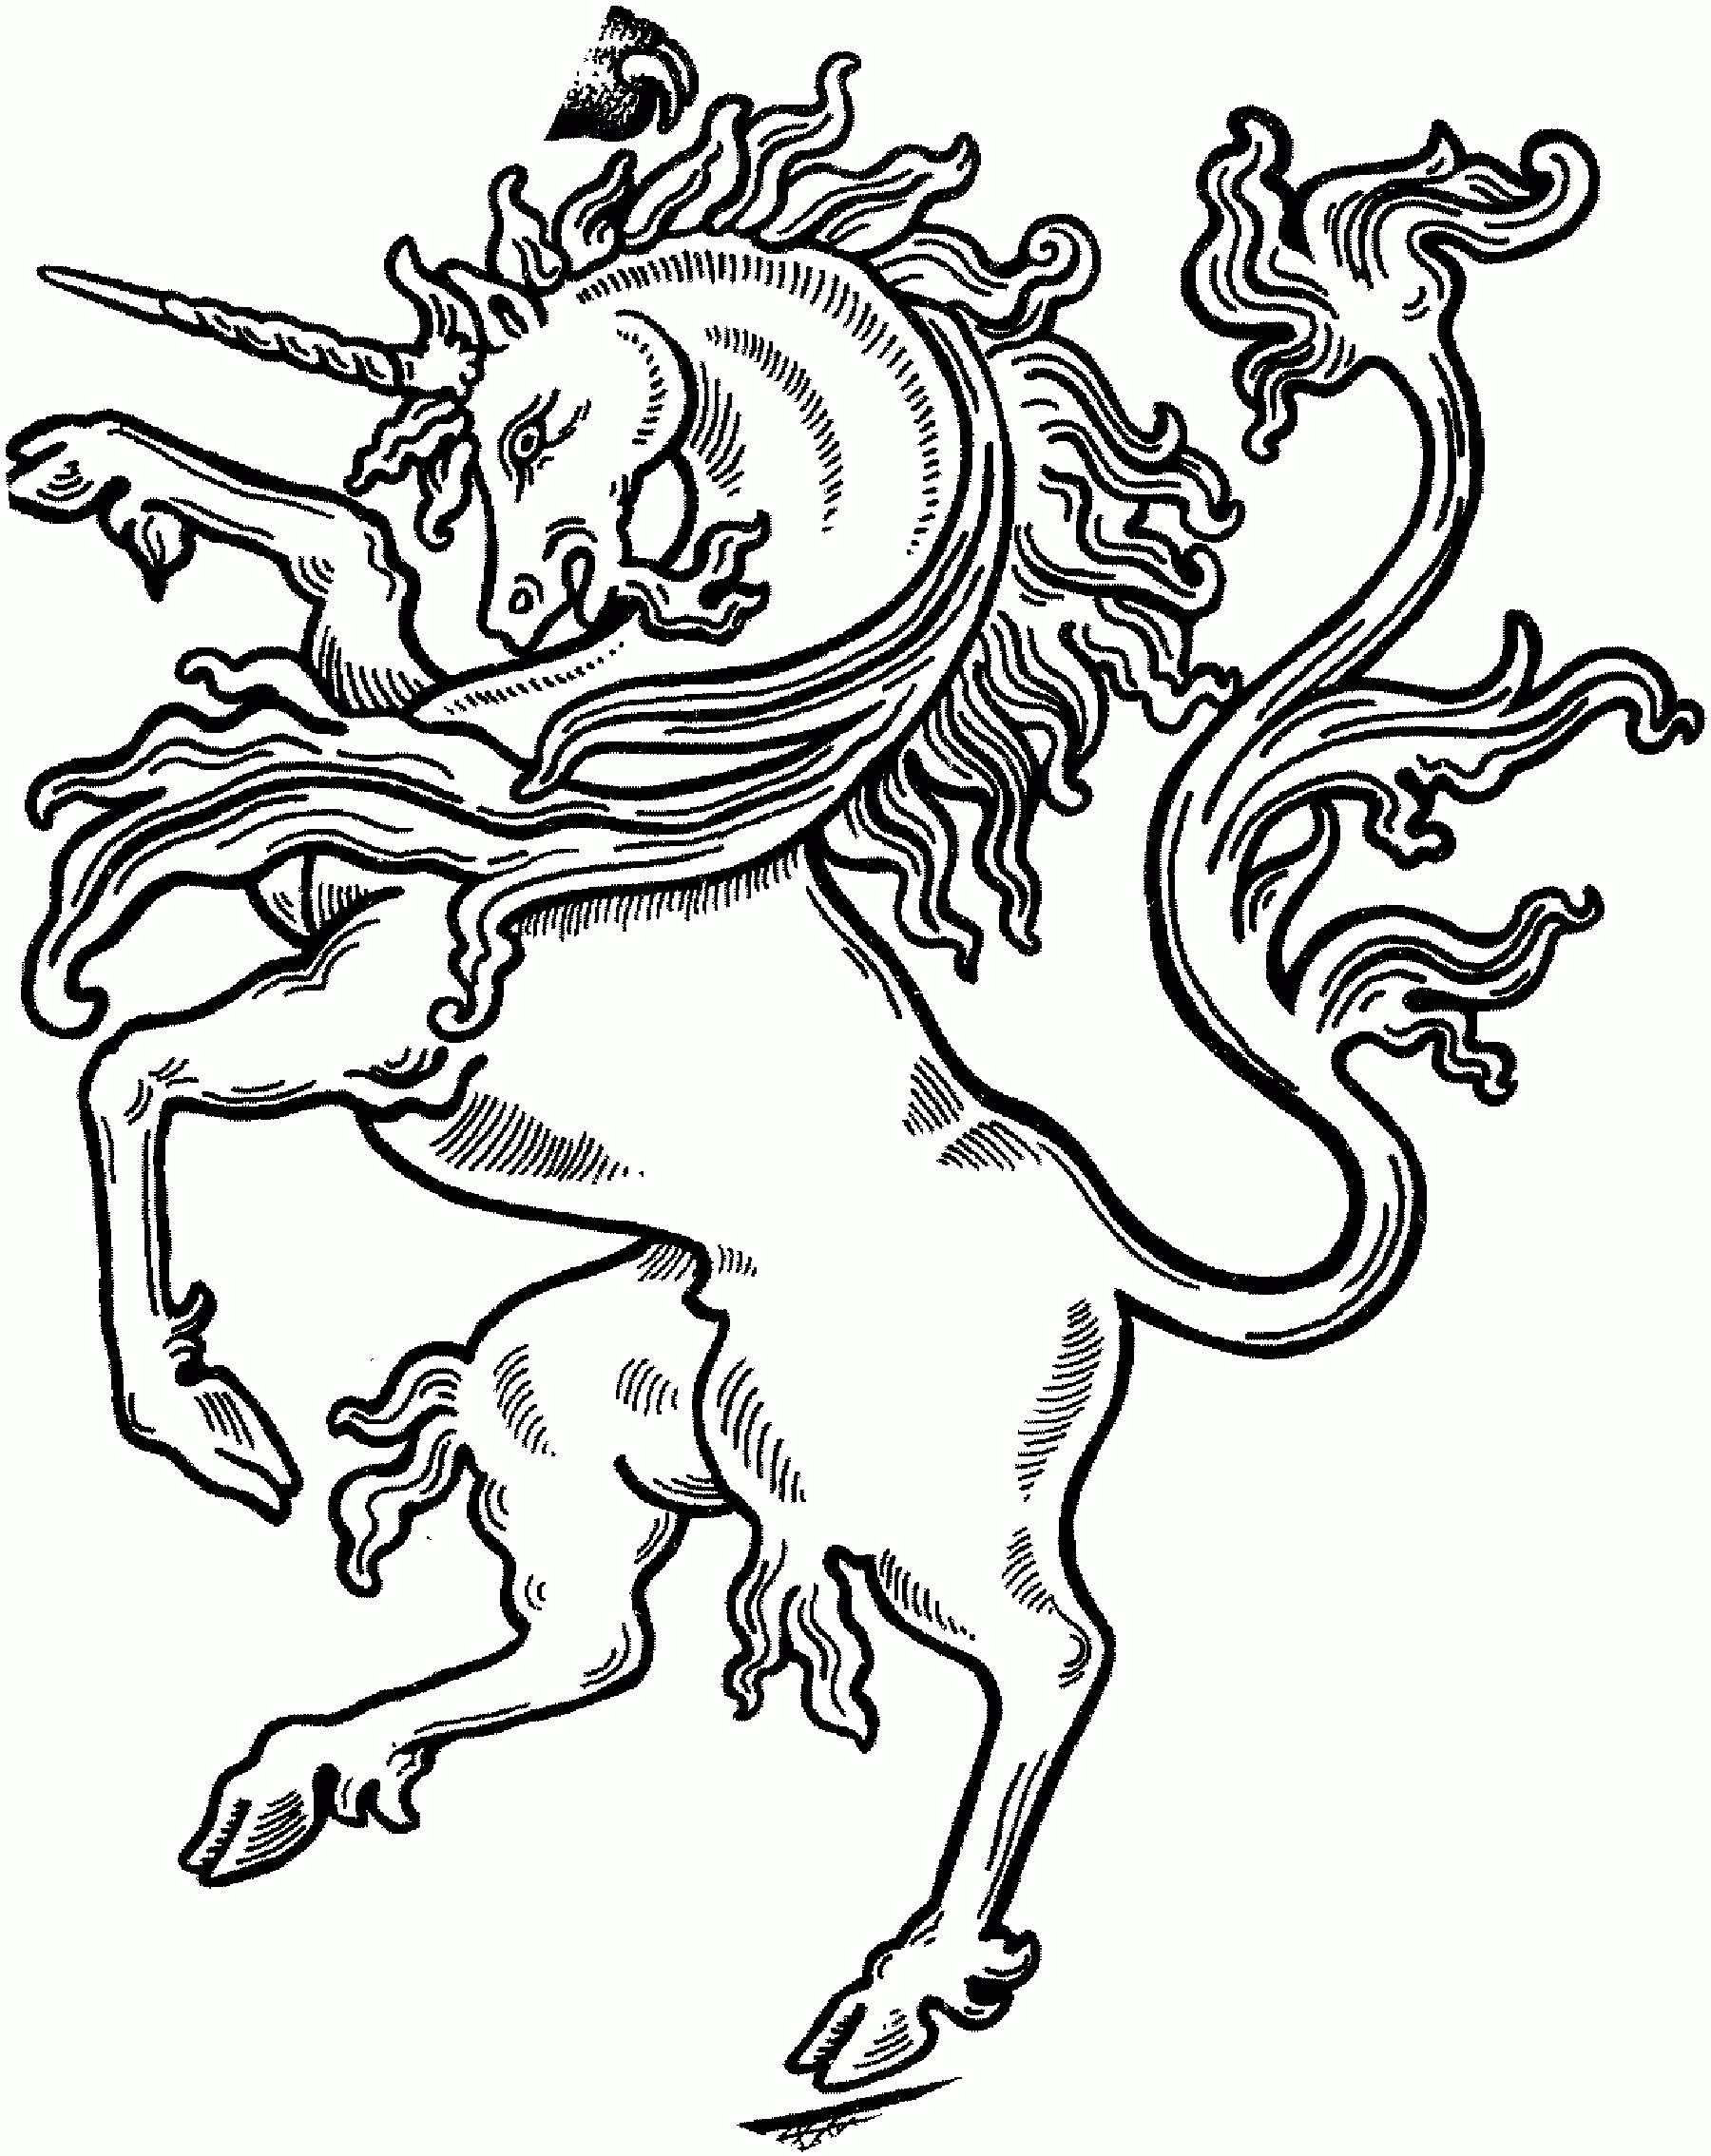 Free Realistic Unicorn Coloring Pages, Download Free Realistic Unicorn